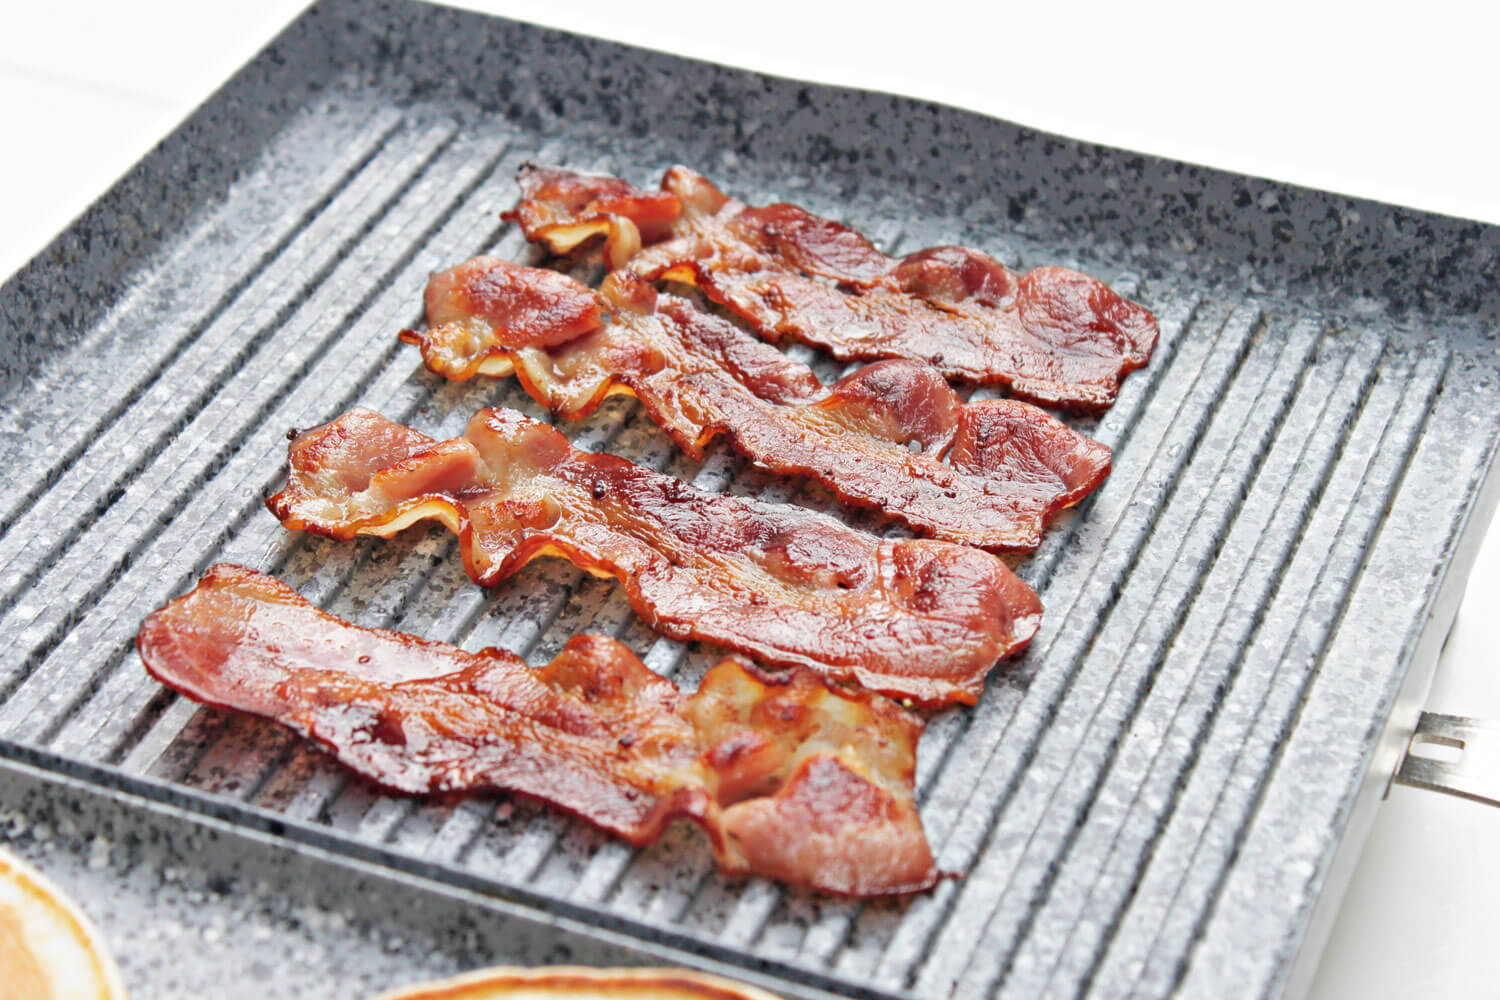 Bacon on Atgrills indoor electric grill pan